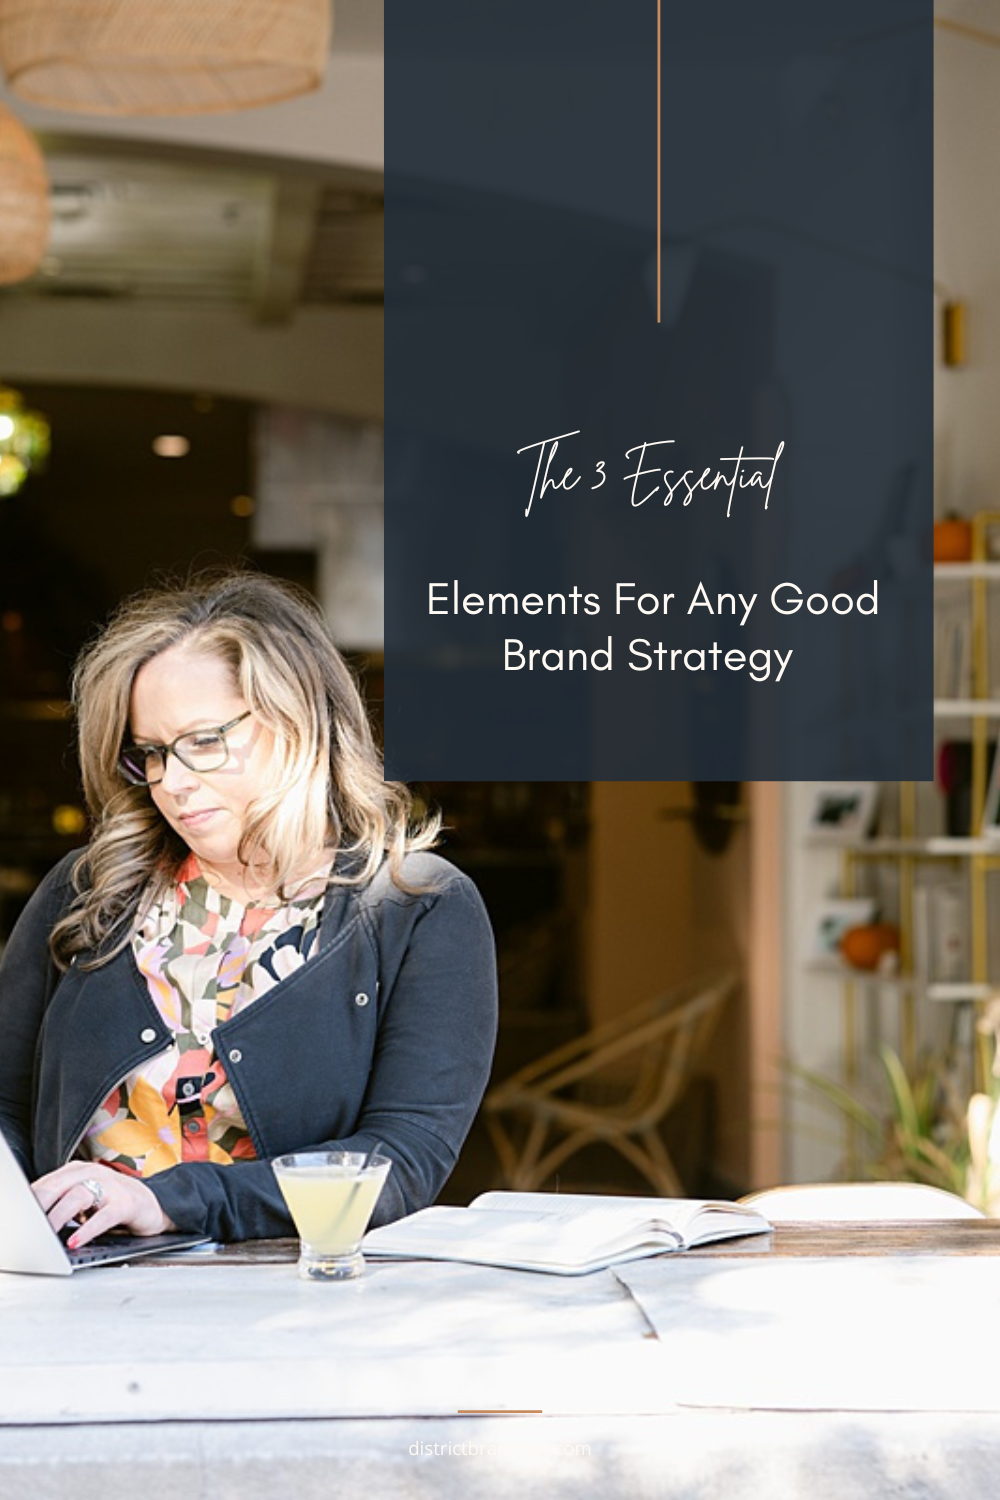 The 3 Essential Elements For Any Good Brand Strategy